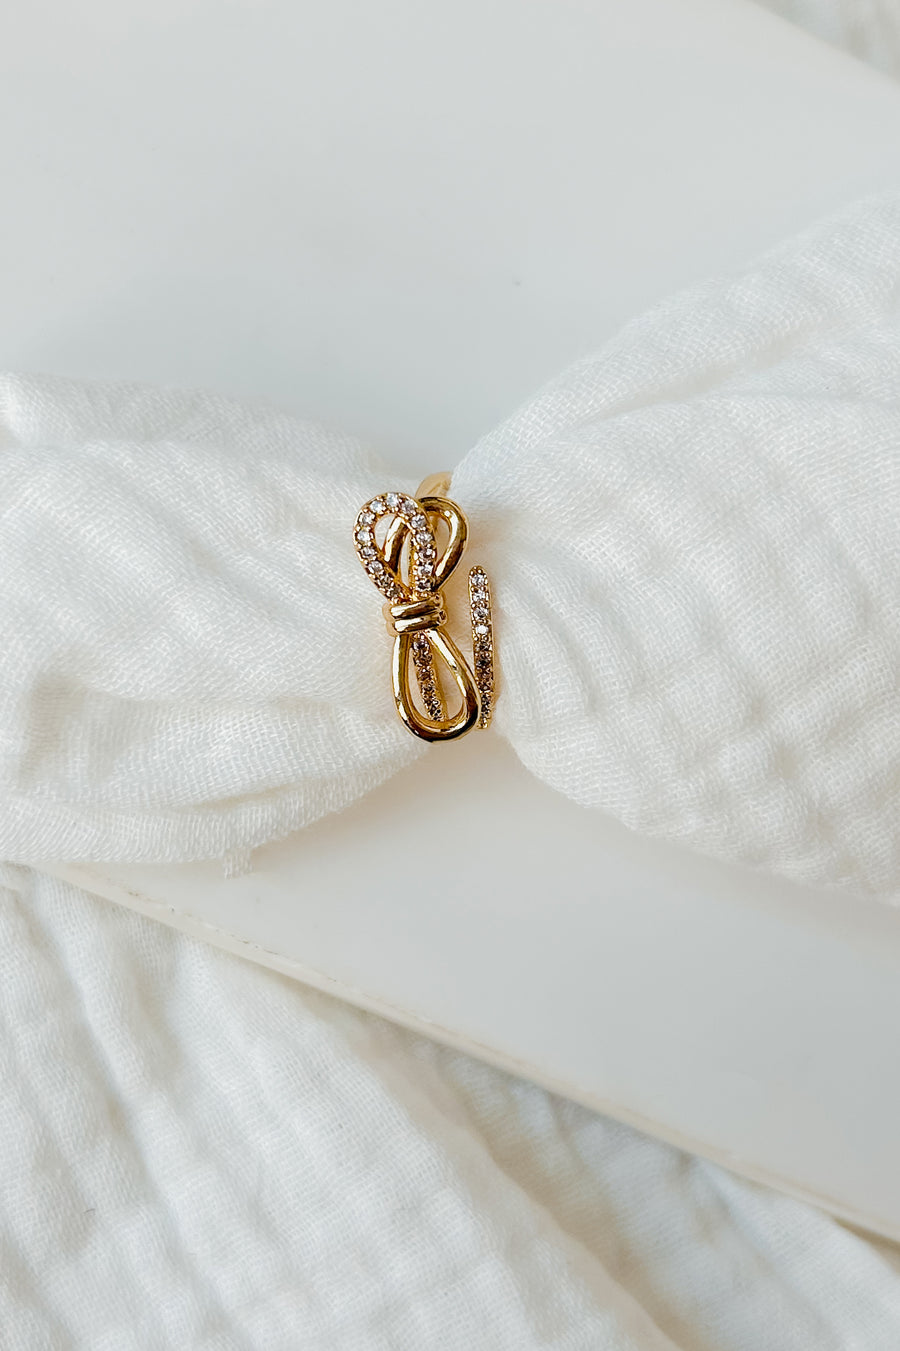 Intertwined Fates Knotted Ring (Gold)